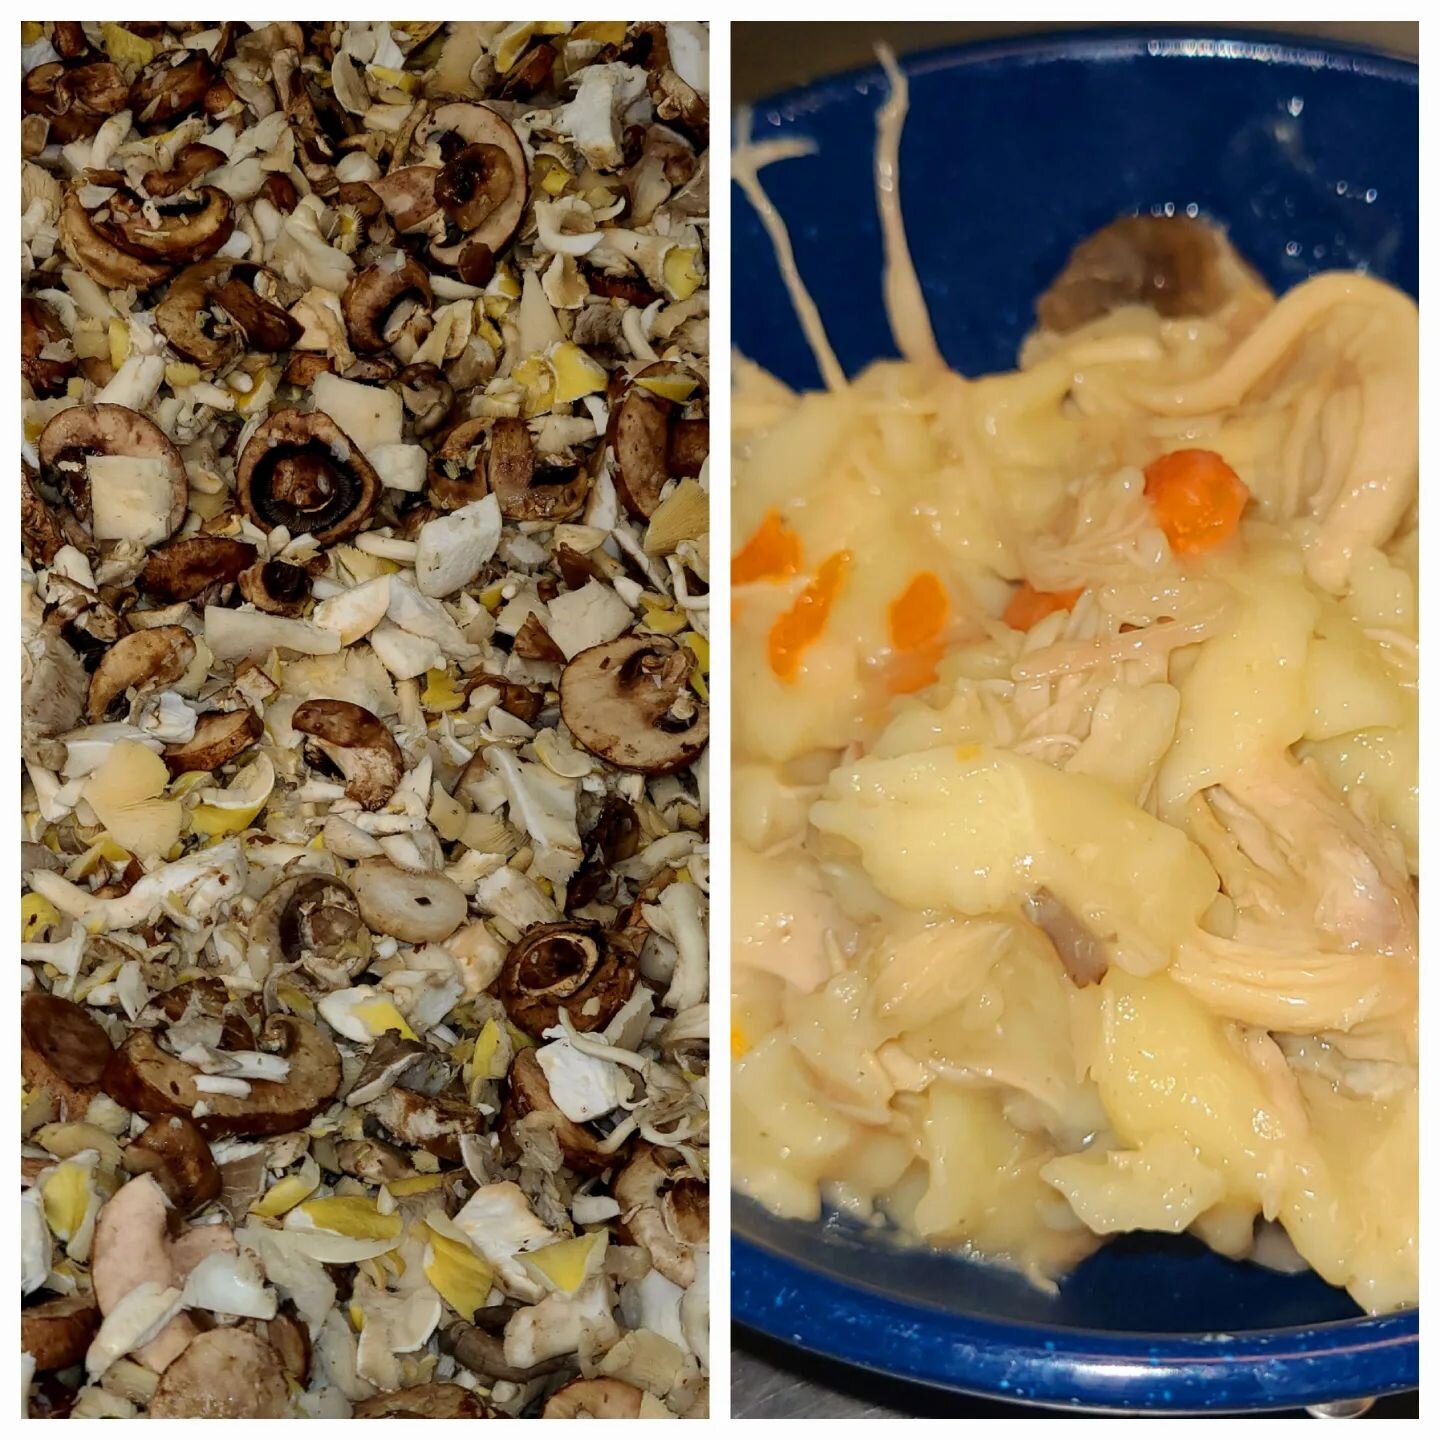 An early picture of the mushrooms that were cooked into the finished main dish of turkey and noodles with veggies and mushrooms. 
It's what's for dinner!